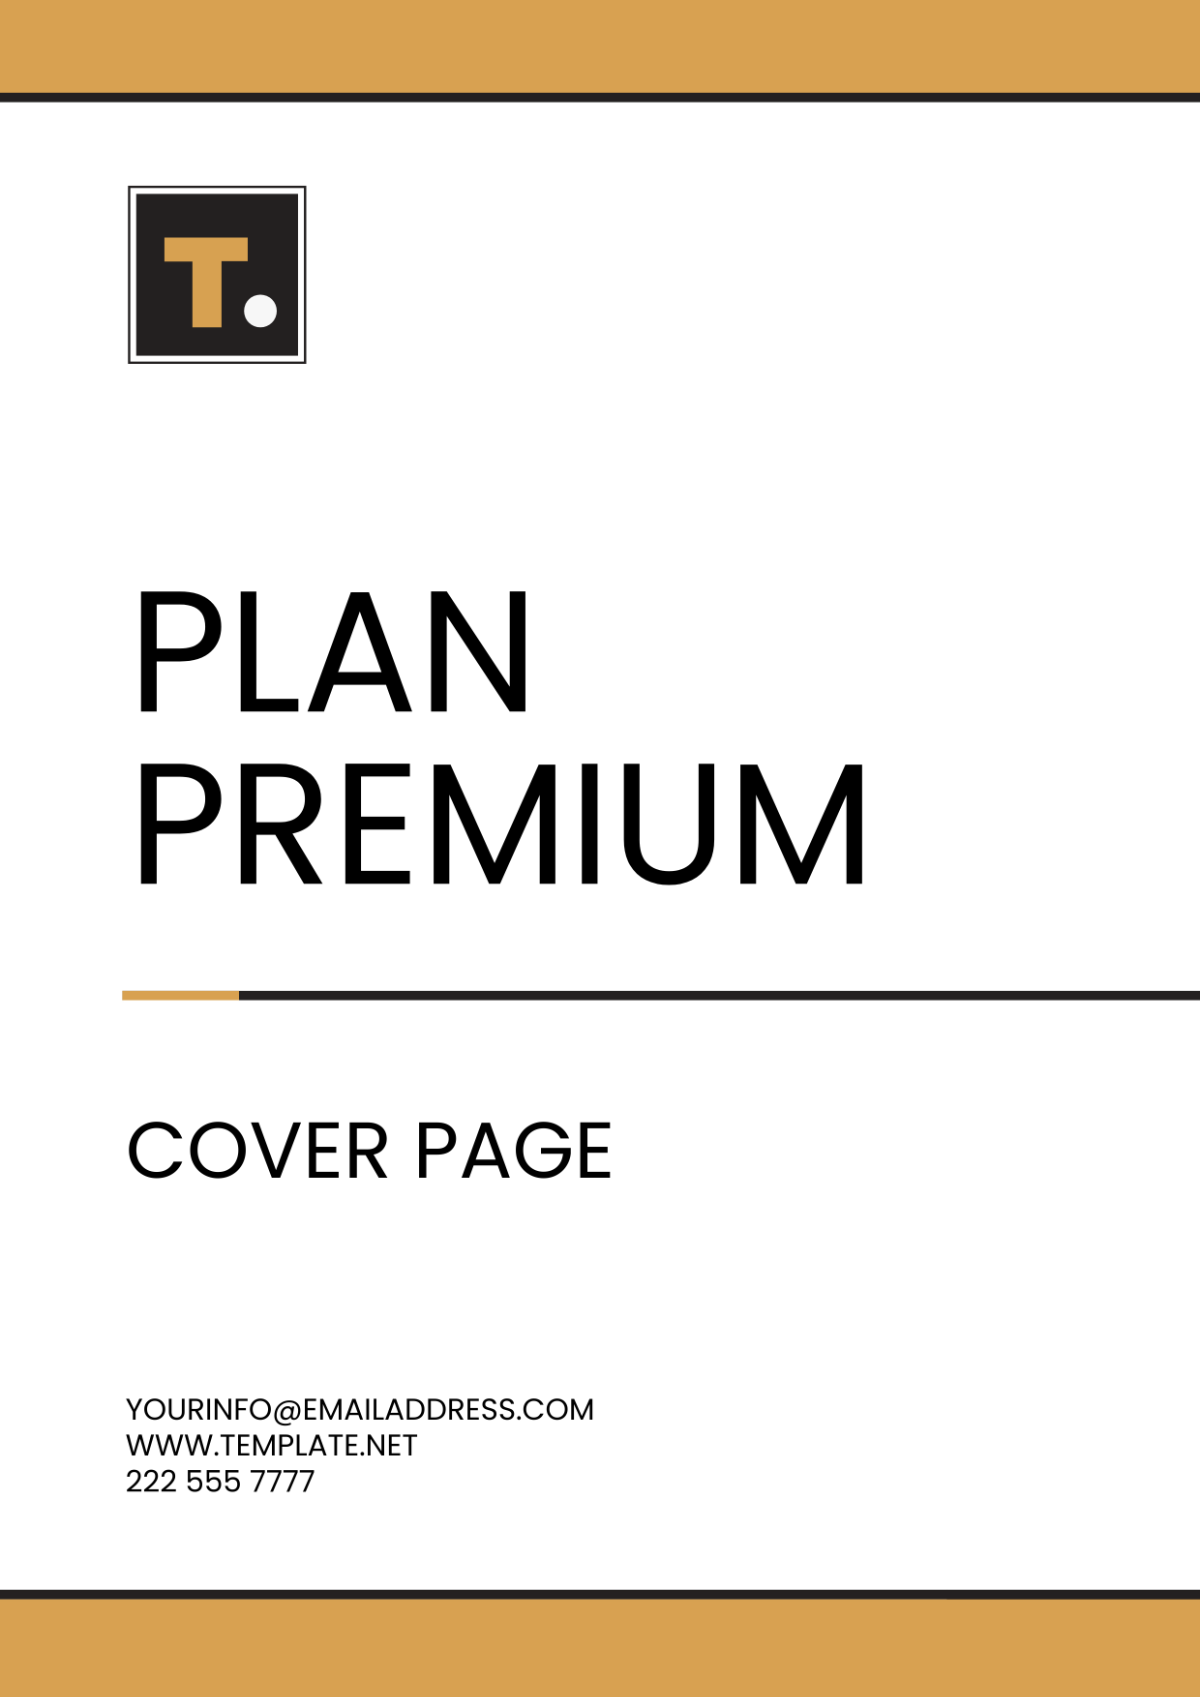 Plan Premium Cover Page Template